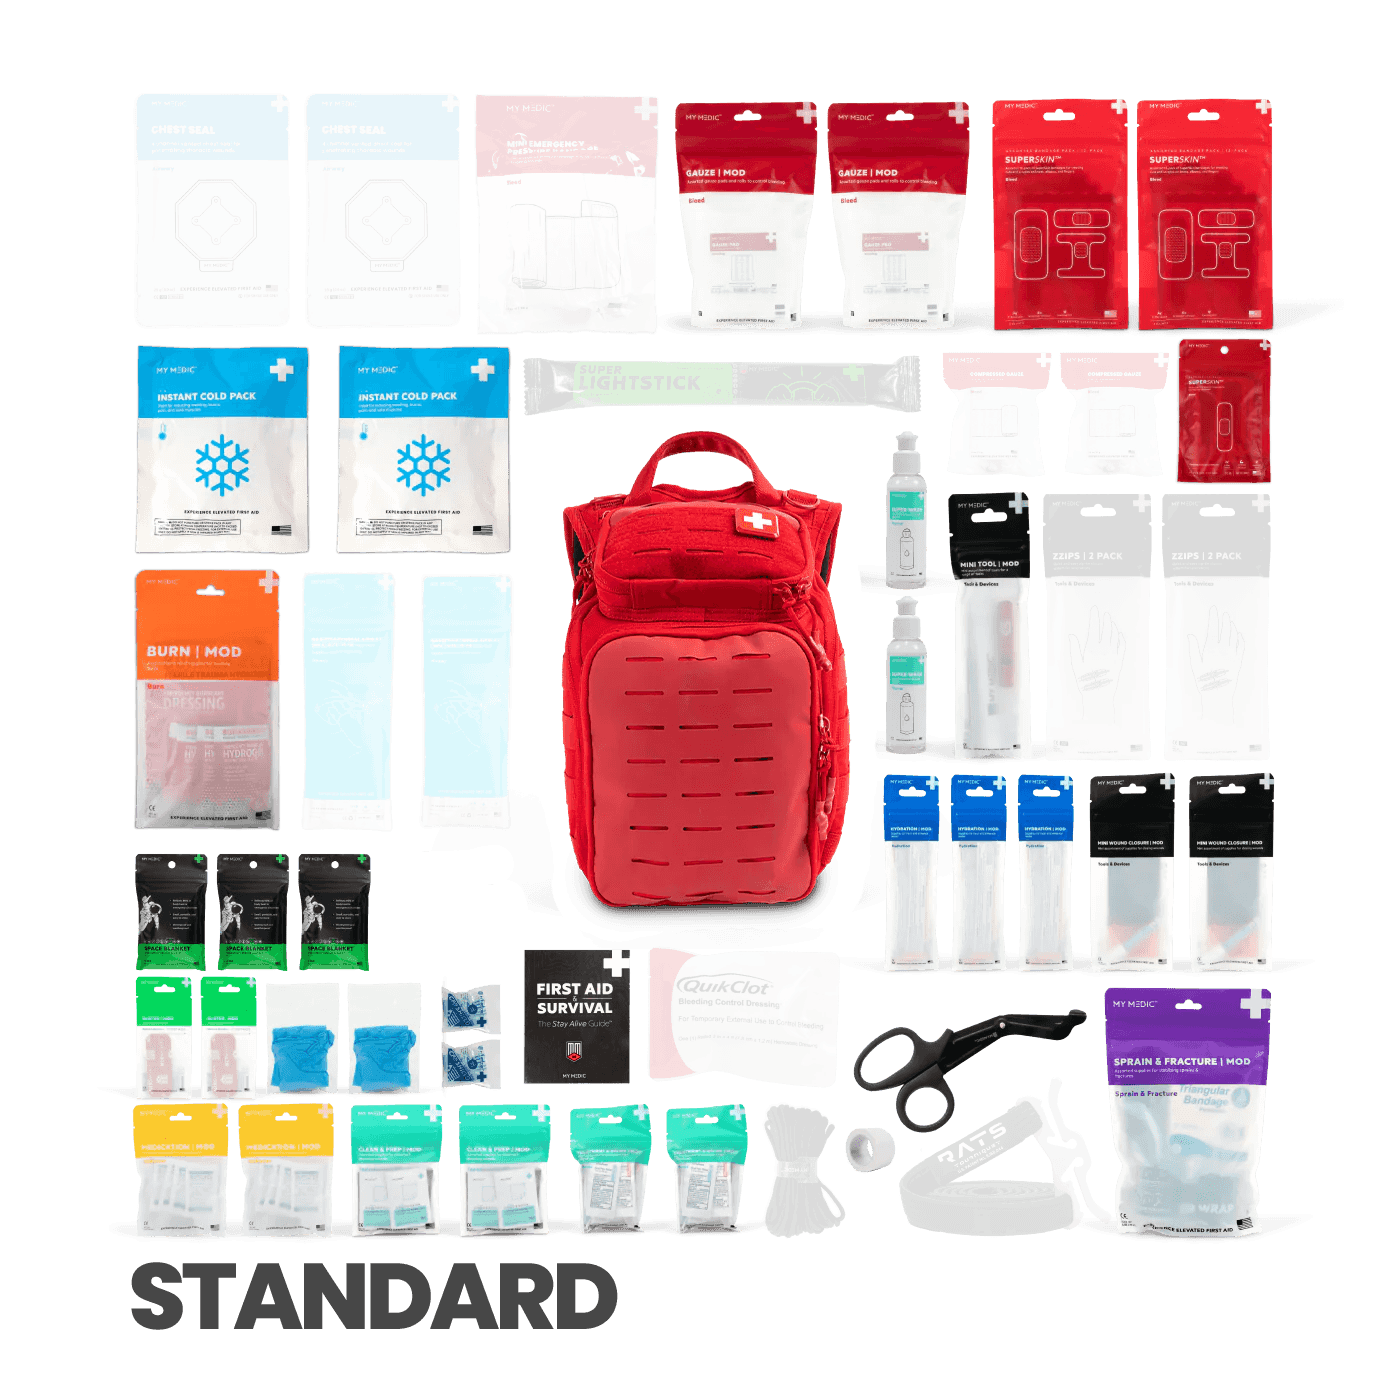 MyMedic Recon First aid kit showing the medical and first aid supplies that come with the standard version of the kit with a black backpack